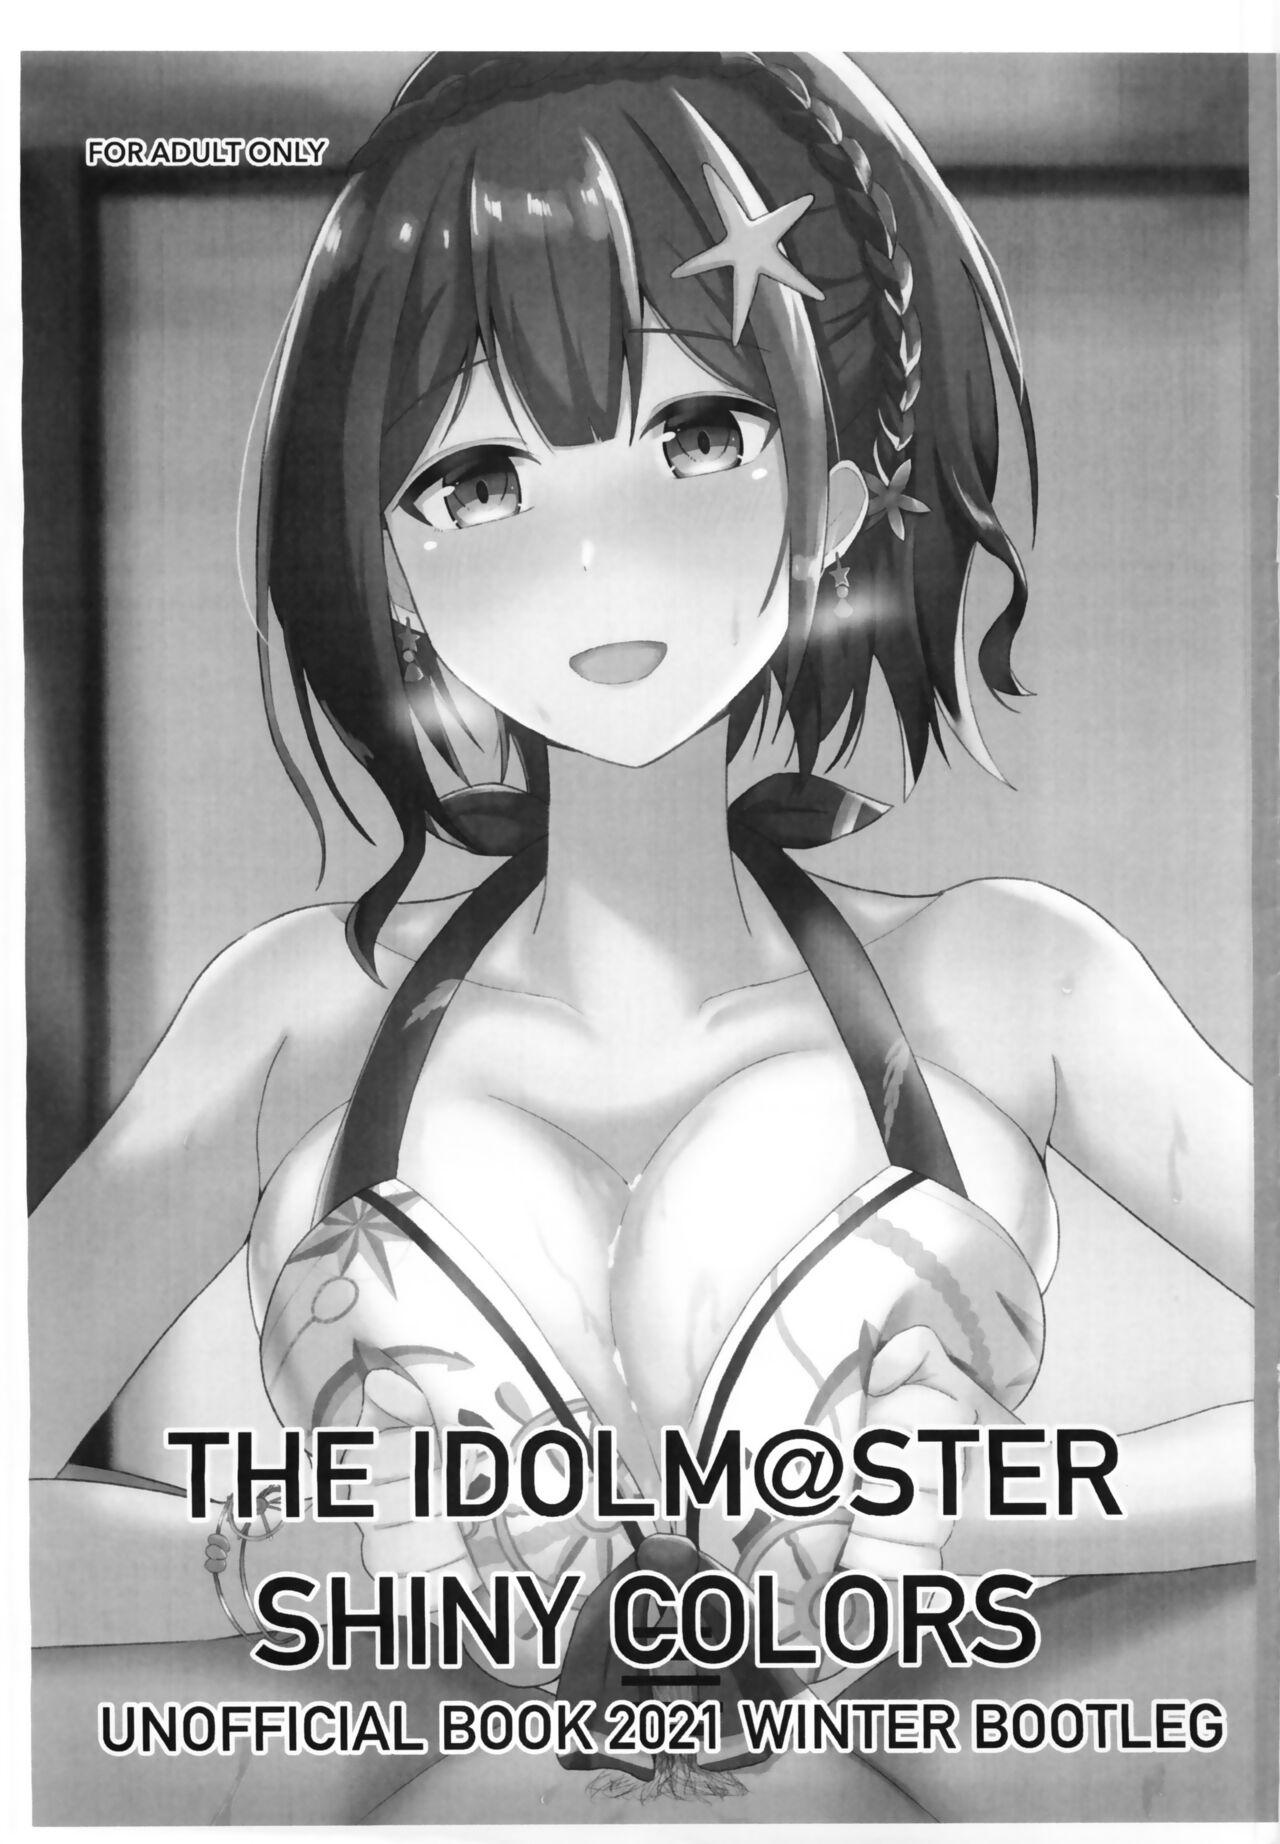 Perfect Body UNOFFICIAL BOOK 2021 WINTER BOOTLEG - The idolmaster Wild Amateurs - Page 1